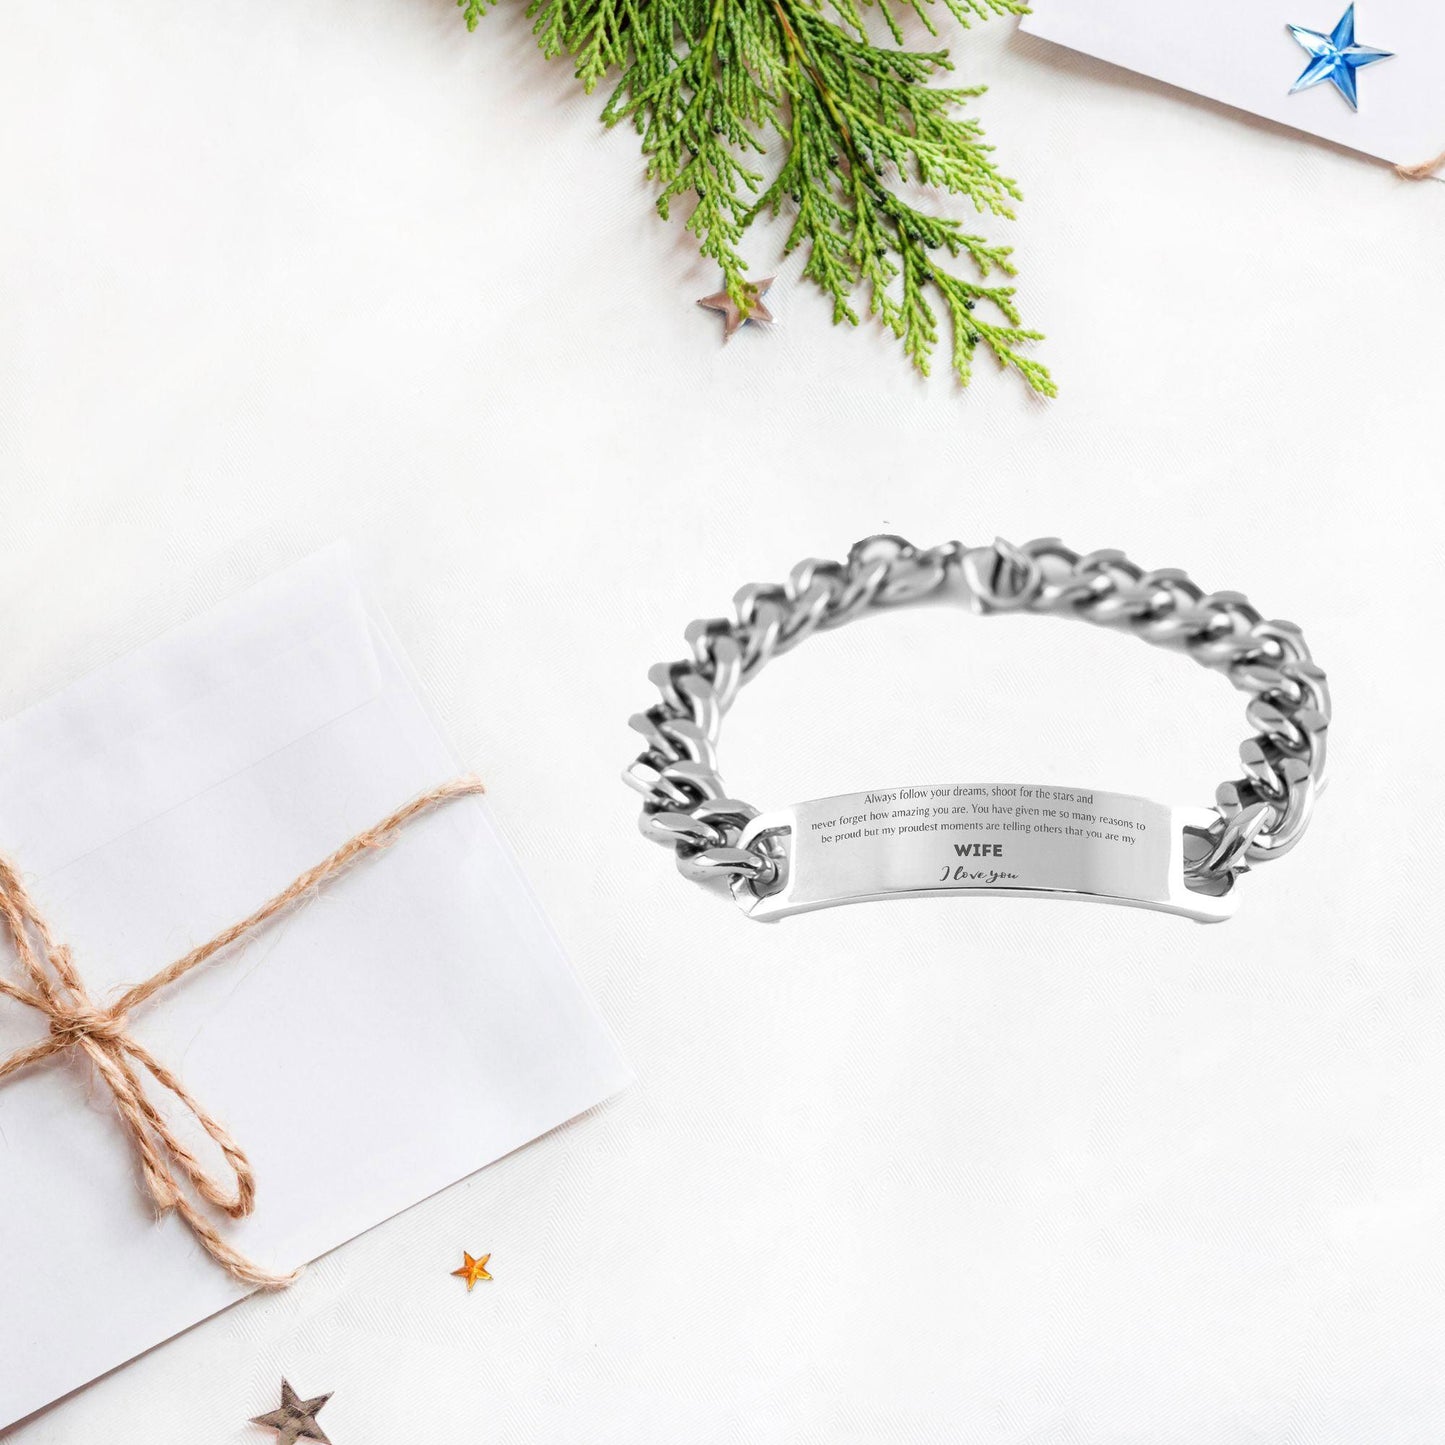 Cuban Chain Stainless Steel Bracelet for Wife Present, Wife Always follow your dreams, never forget how amazing you are, Wife Birthday Christmas Gifts Jewelry for Girls Boys Teen Men Women - Mallard Moon Gift Shop